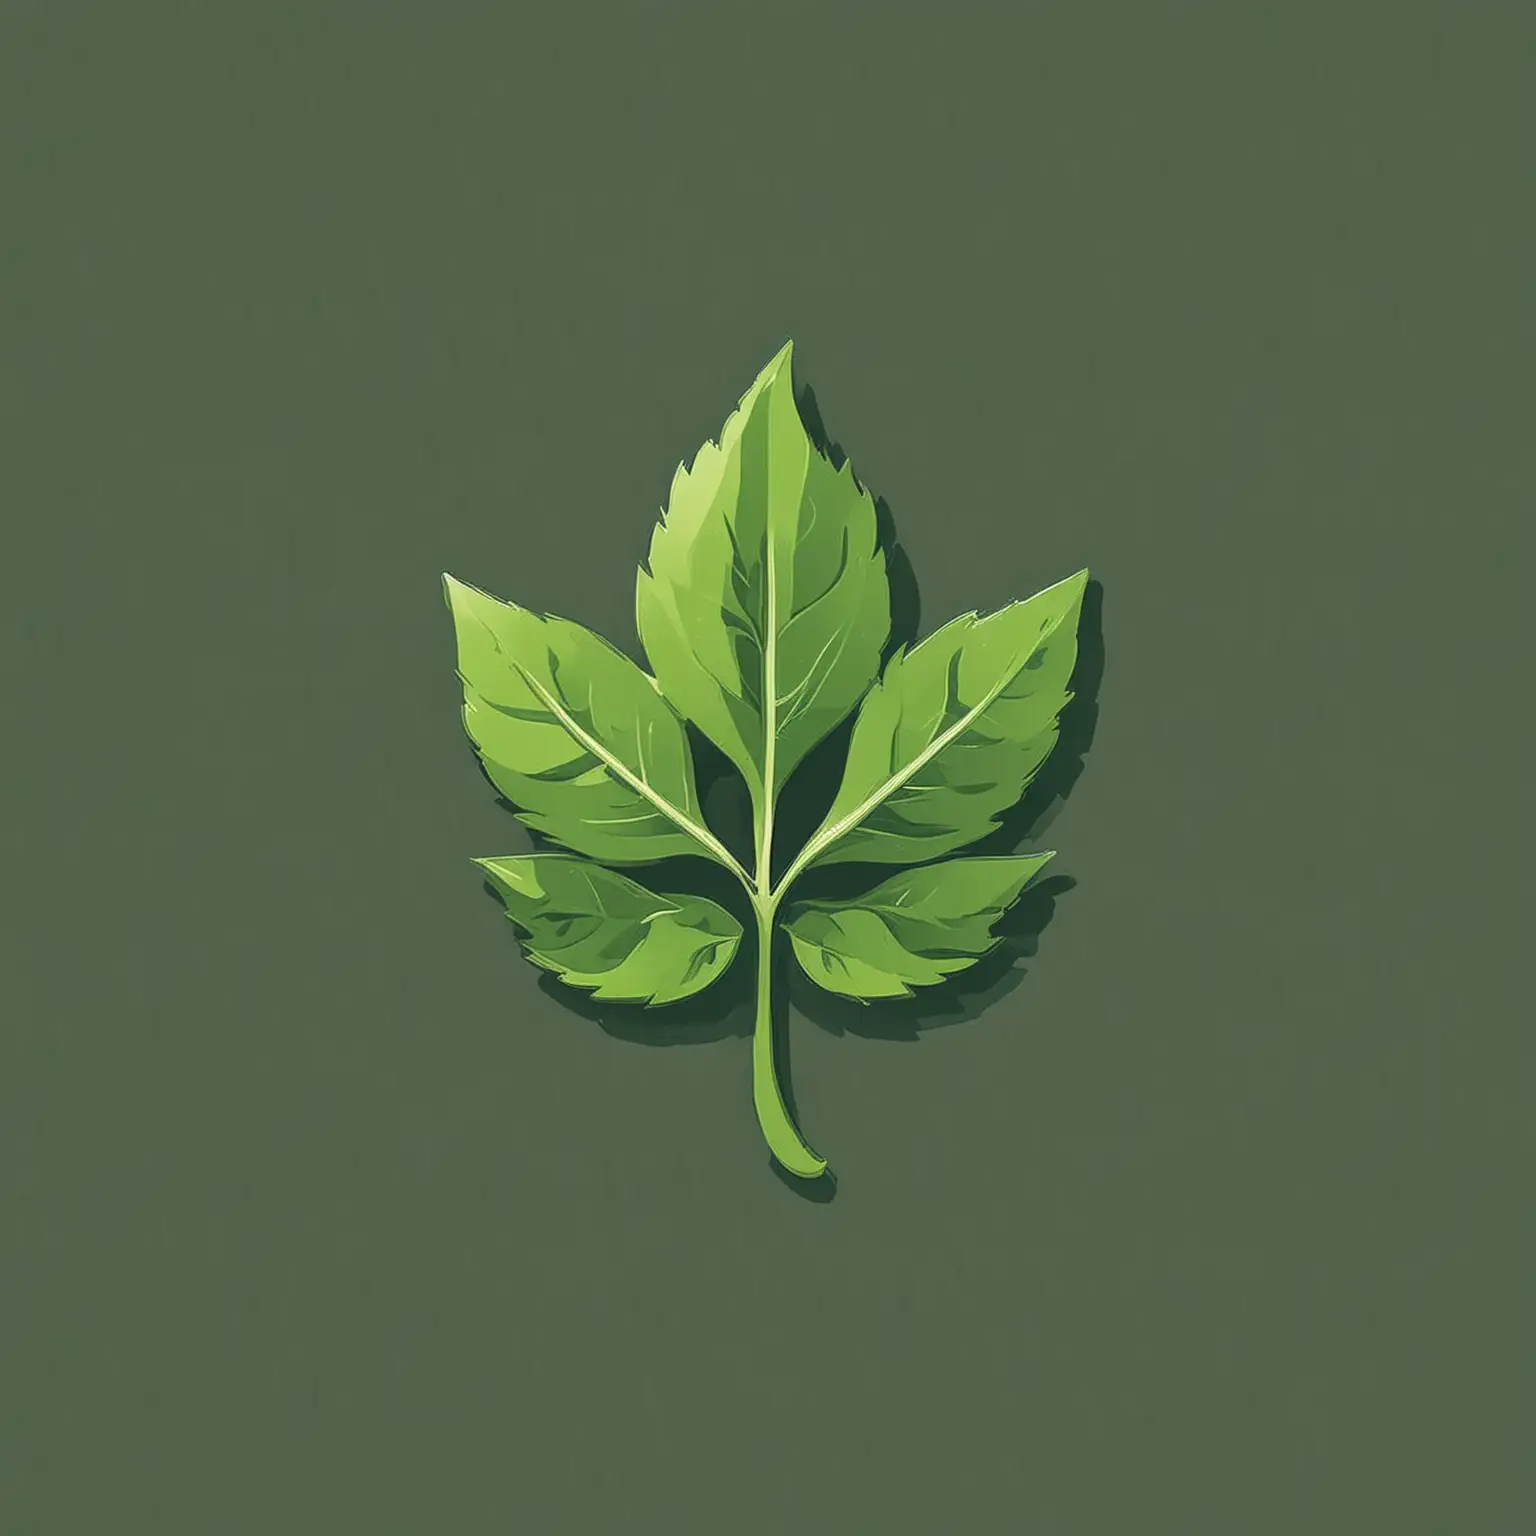 using a green leaf as the main body, create a logo, with a flat design style